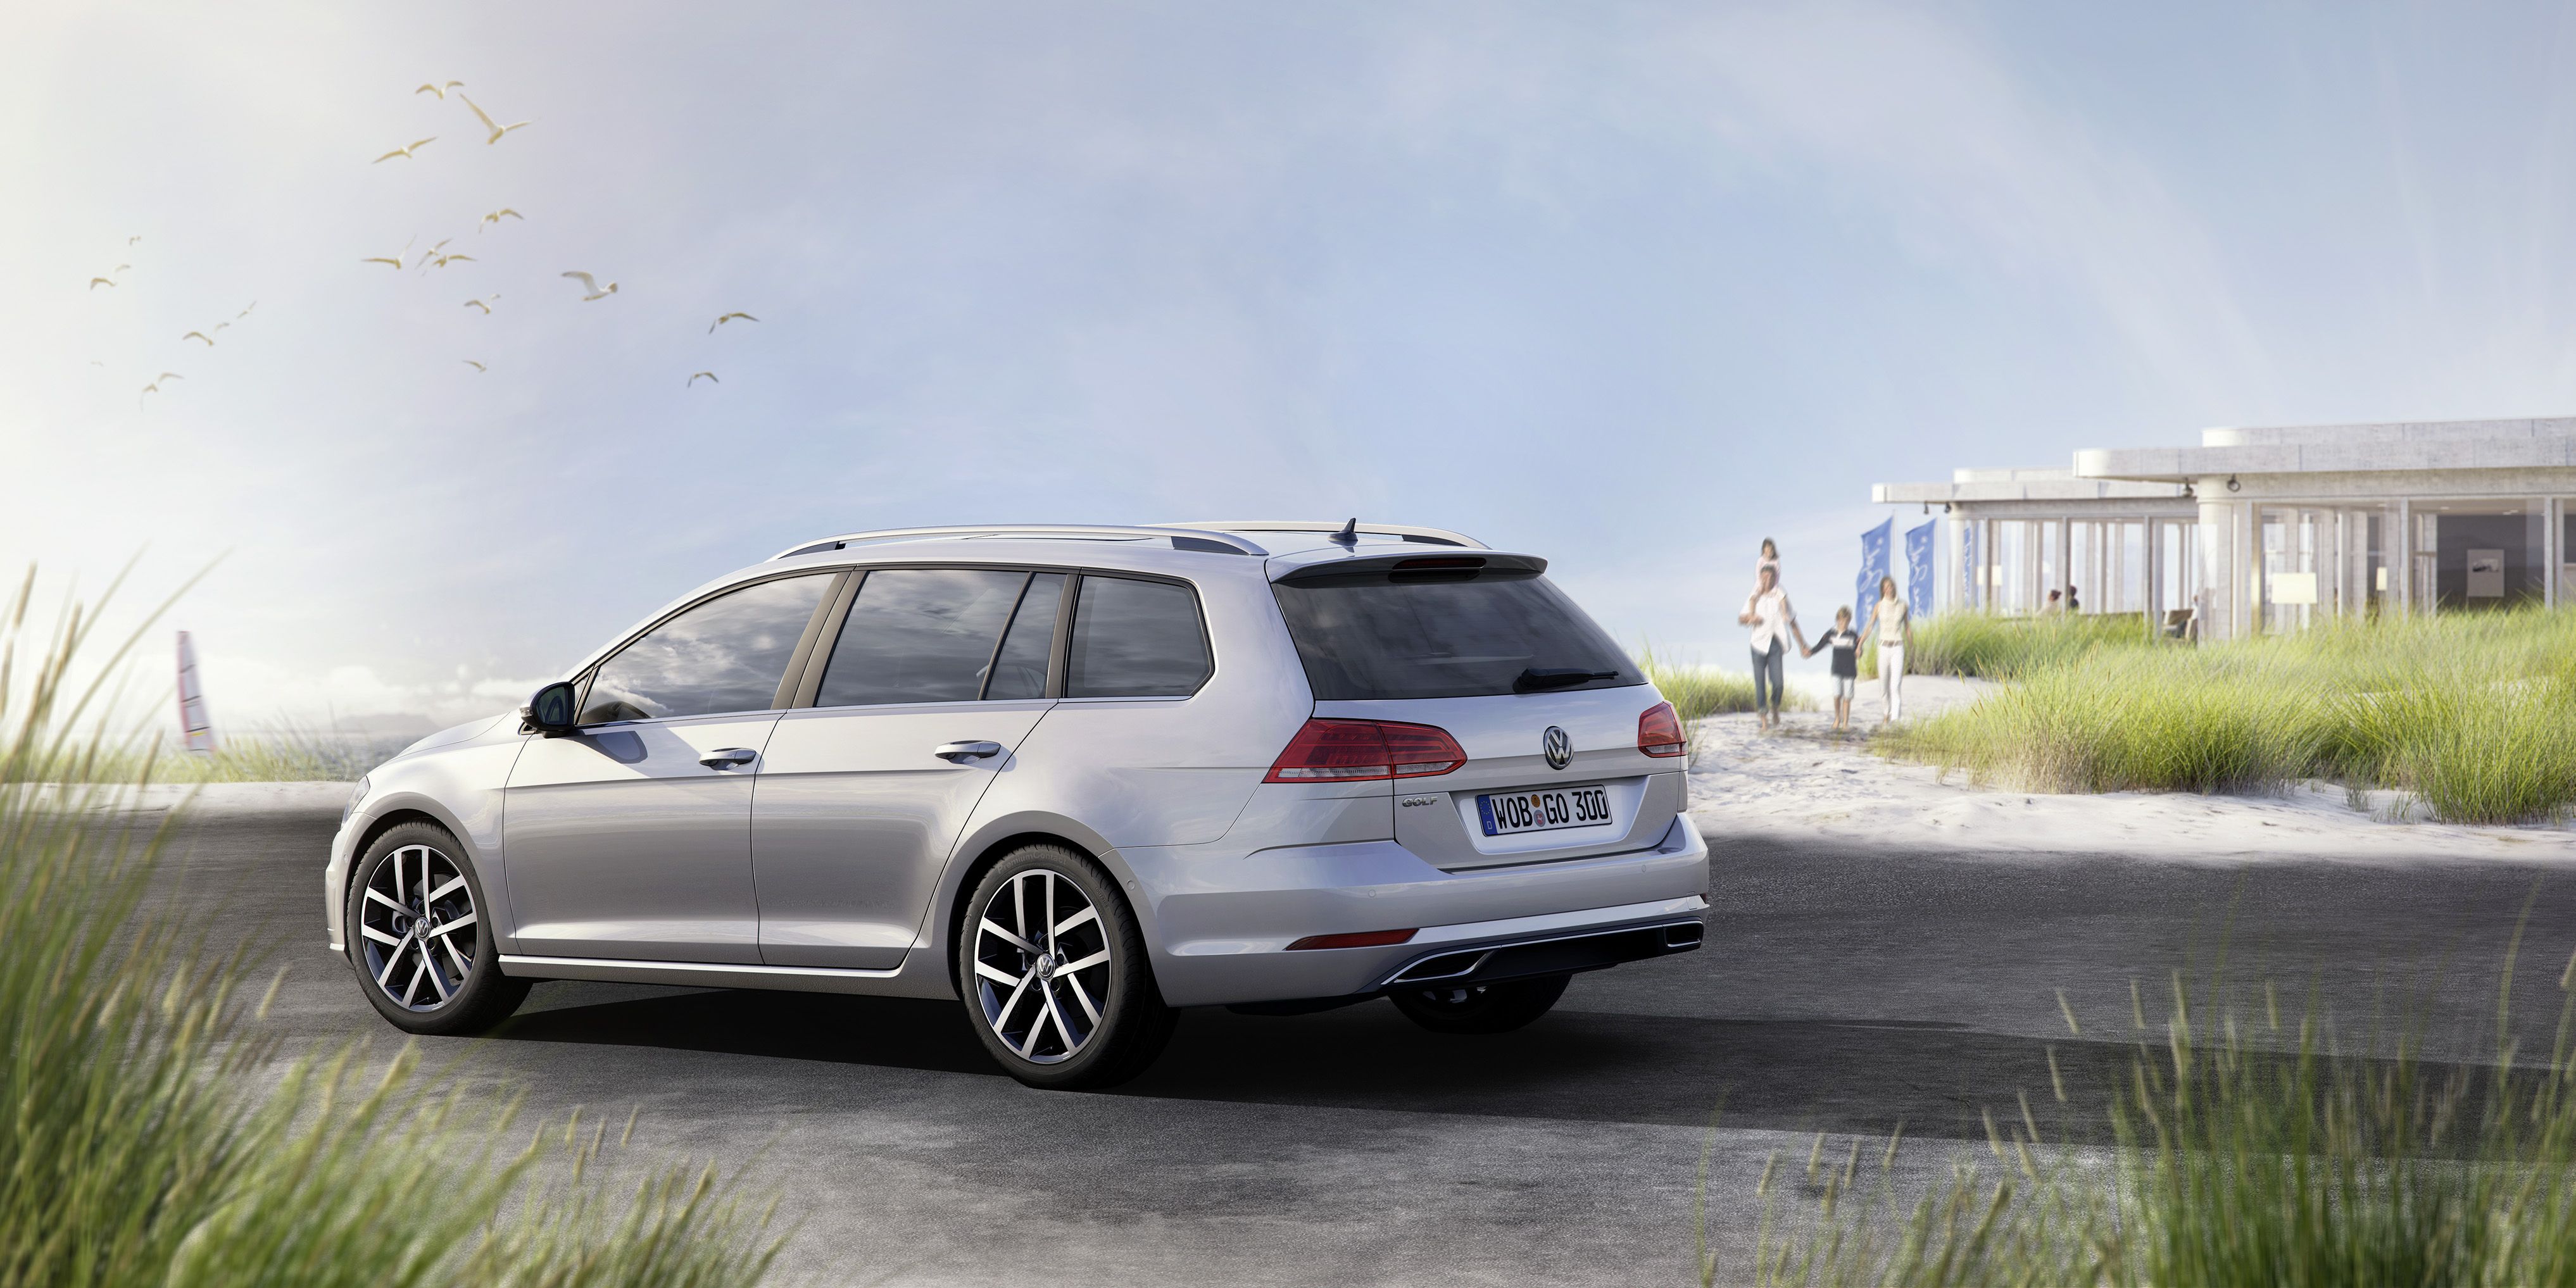 VW's Biggest Product Offensive Ever Starts With a New Golf